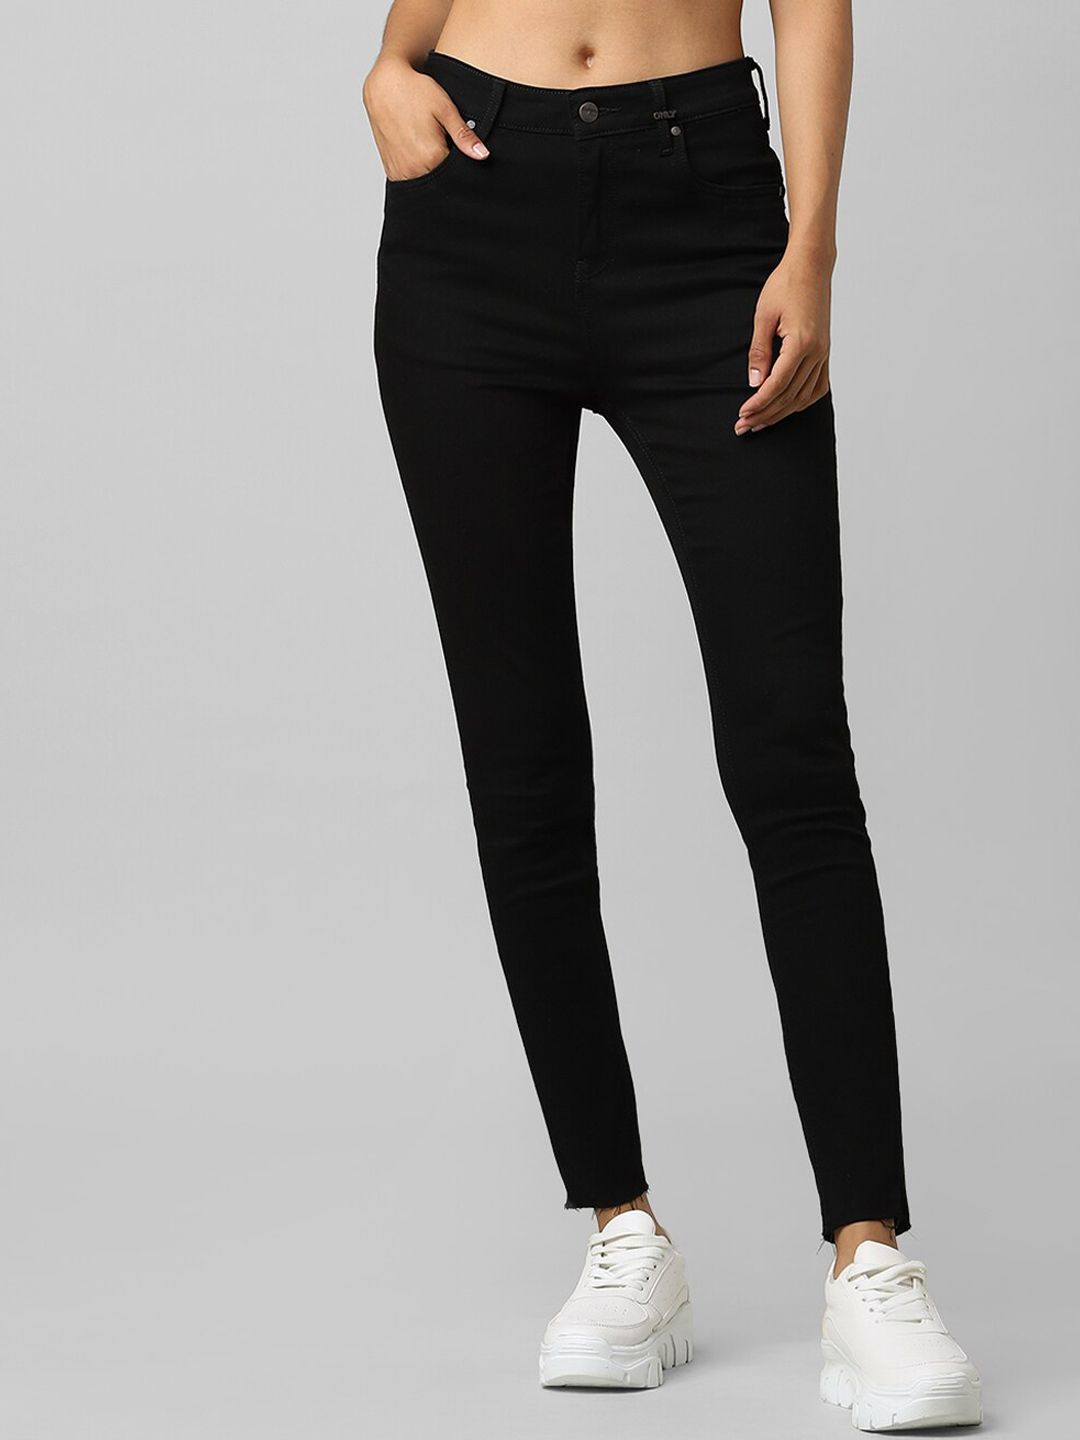 ONLY Women Black Skinny Fit High-Rise Jeans Price in India